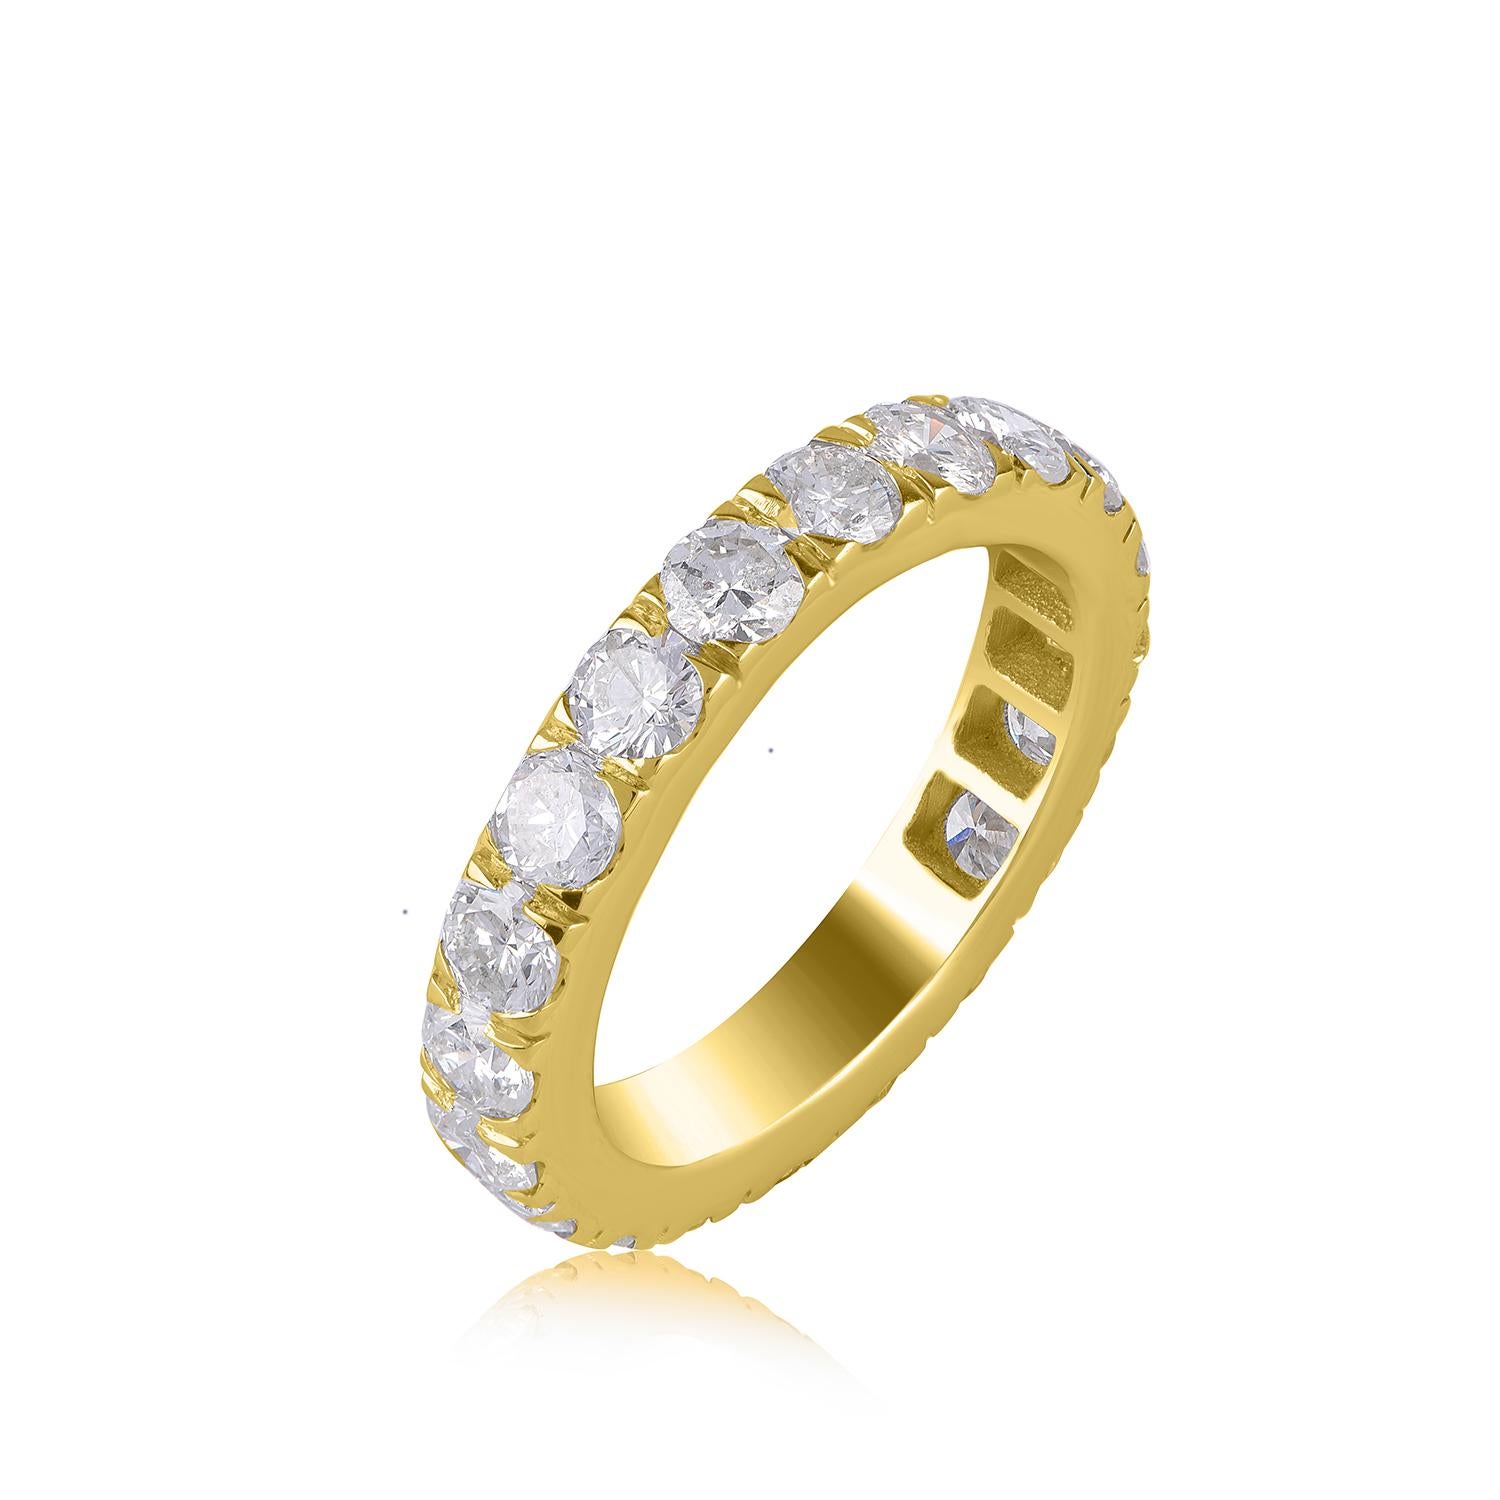 Add a touch of elegance to your look with this diamond engagement band. This diamond band is studded with 20 round-cut diamonds in micro-pave setting, and diamonds are graded H-I Color, I1-I2 Clarity. Crafted  in 14 KT yellow gold and it comes along